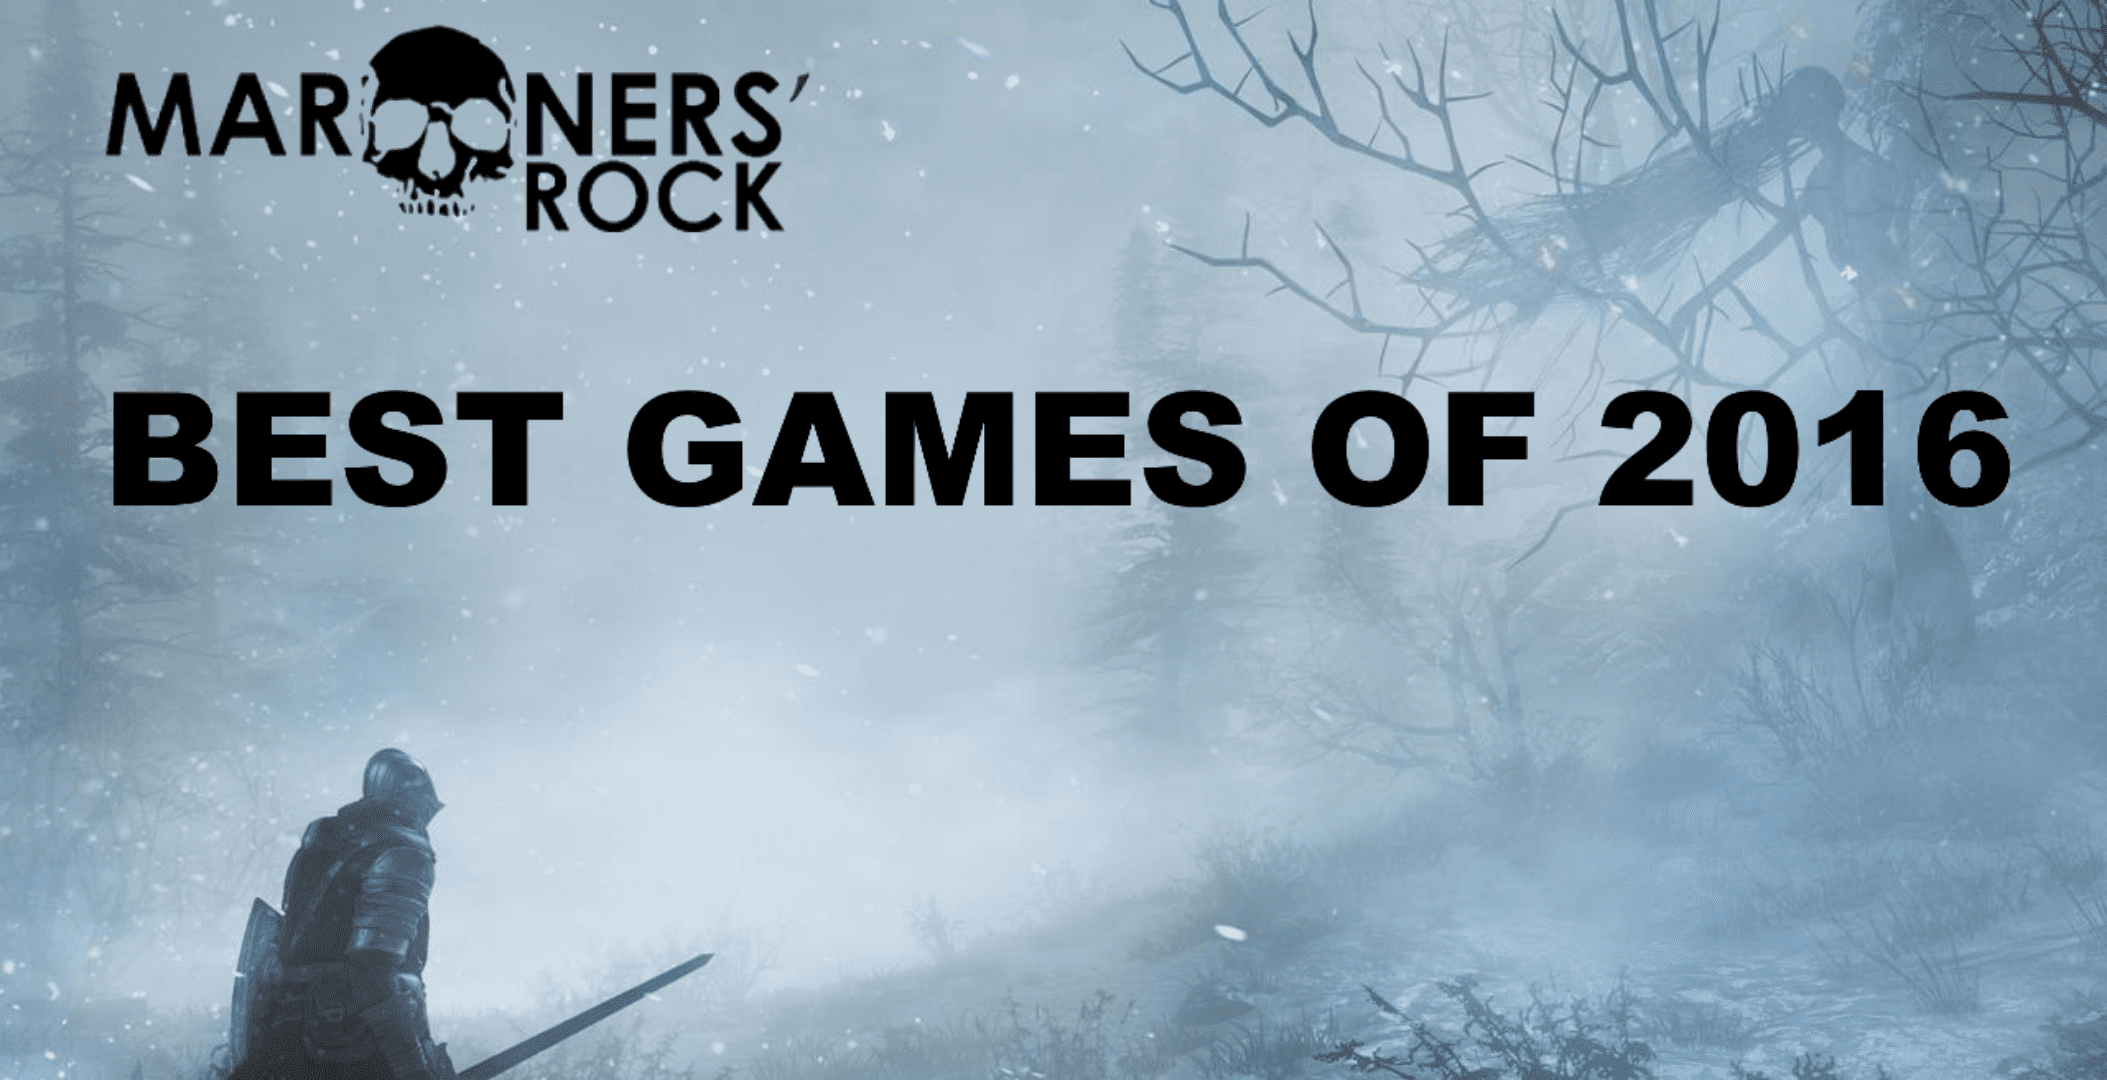 The Best Games of 2016